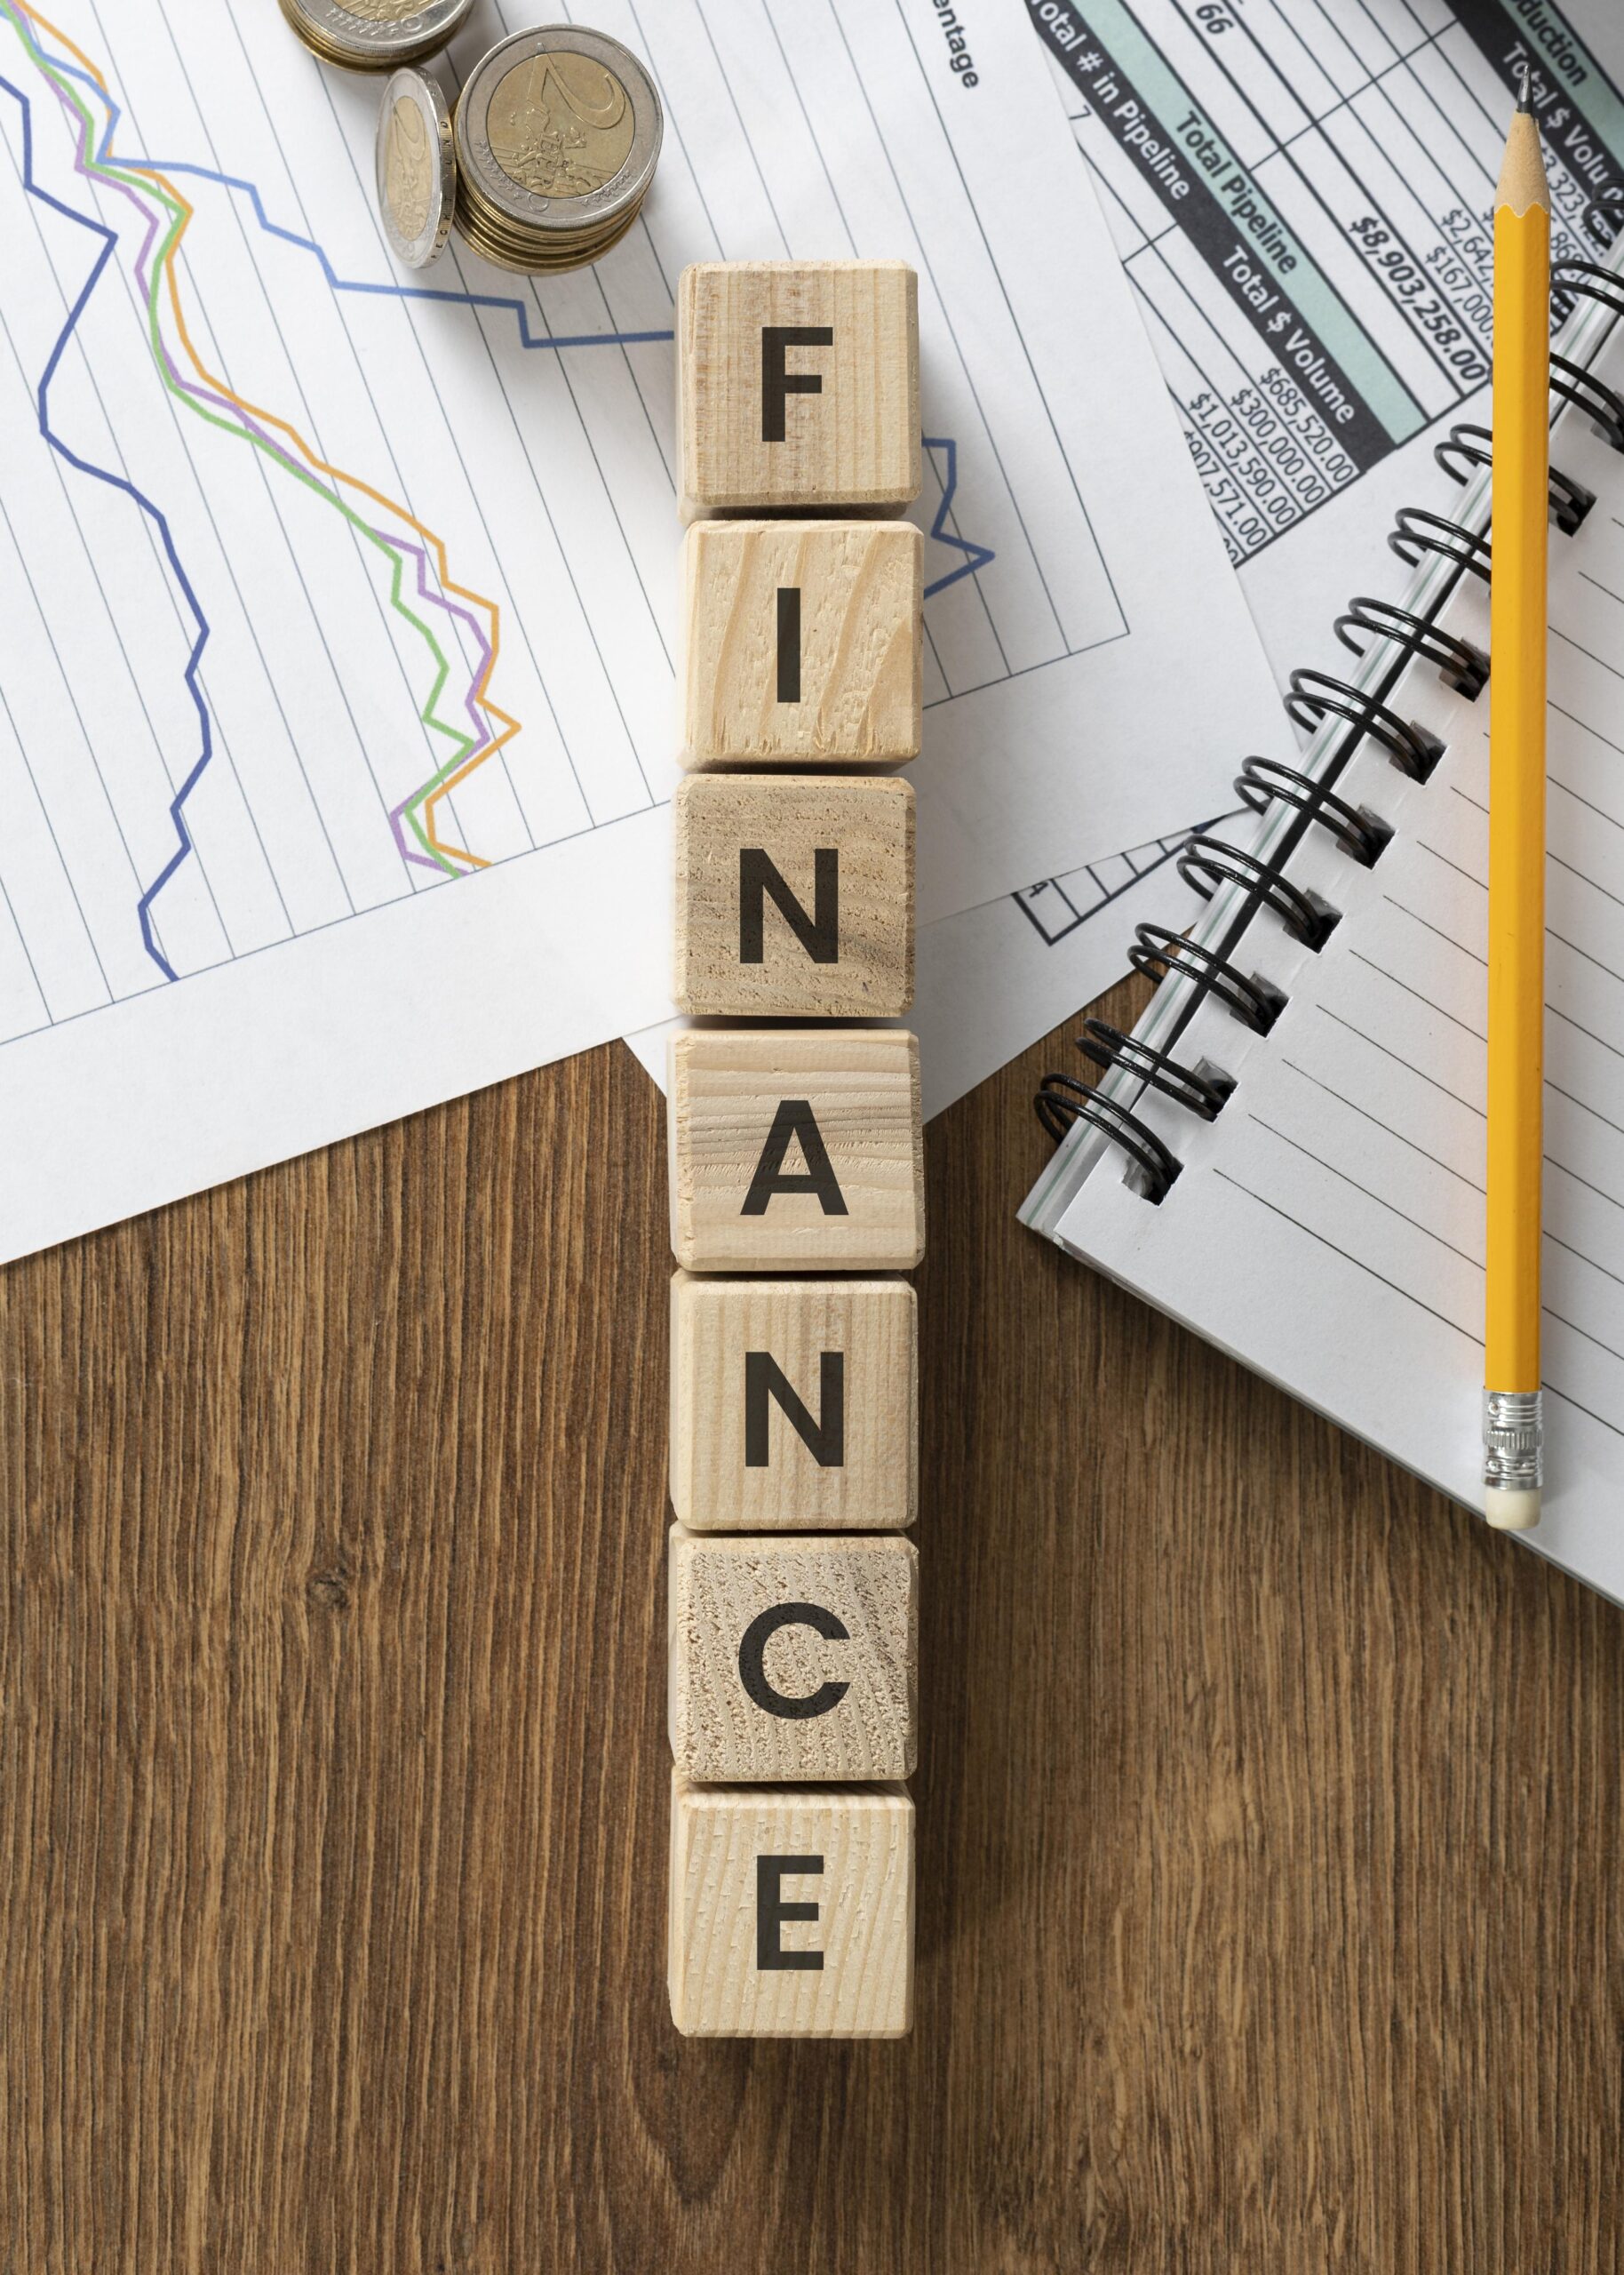 Understanding Financial Statements: A Guide for Non-Finance Professionals.